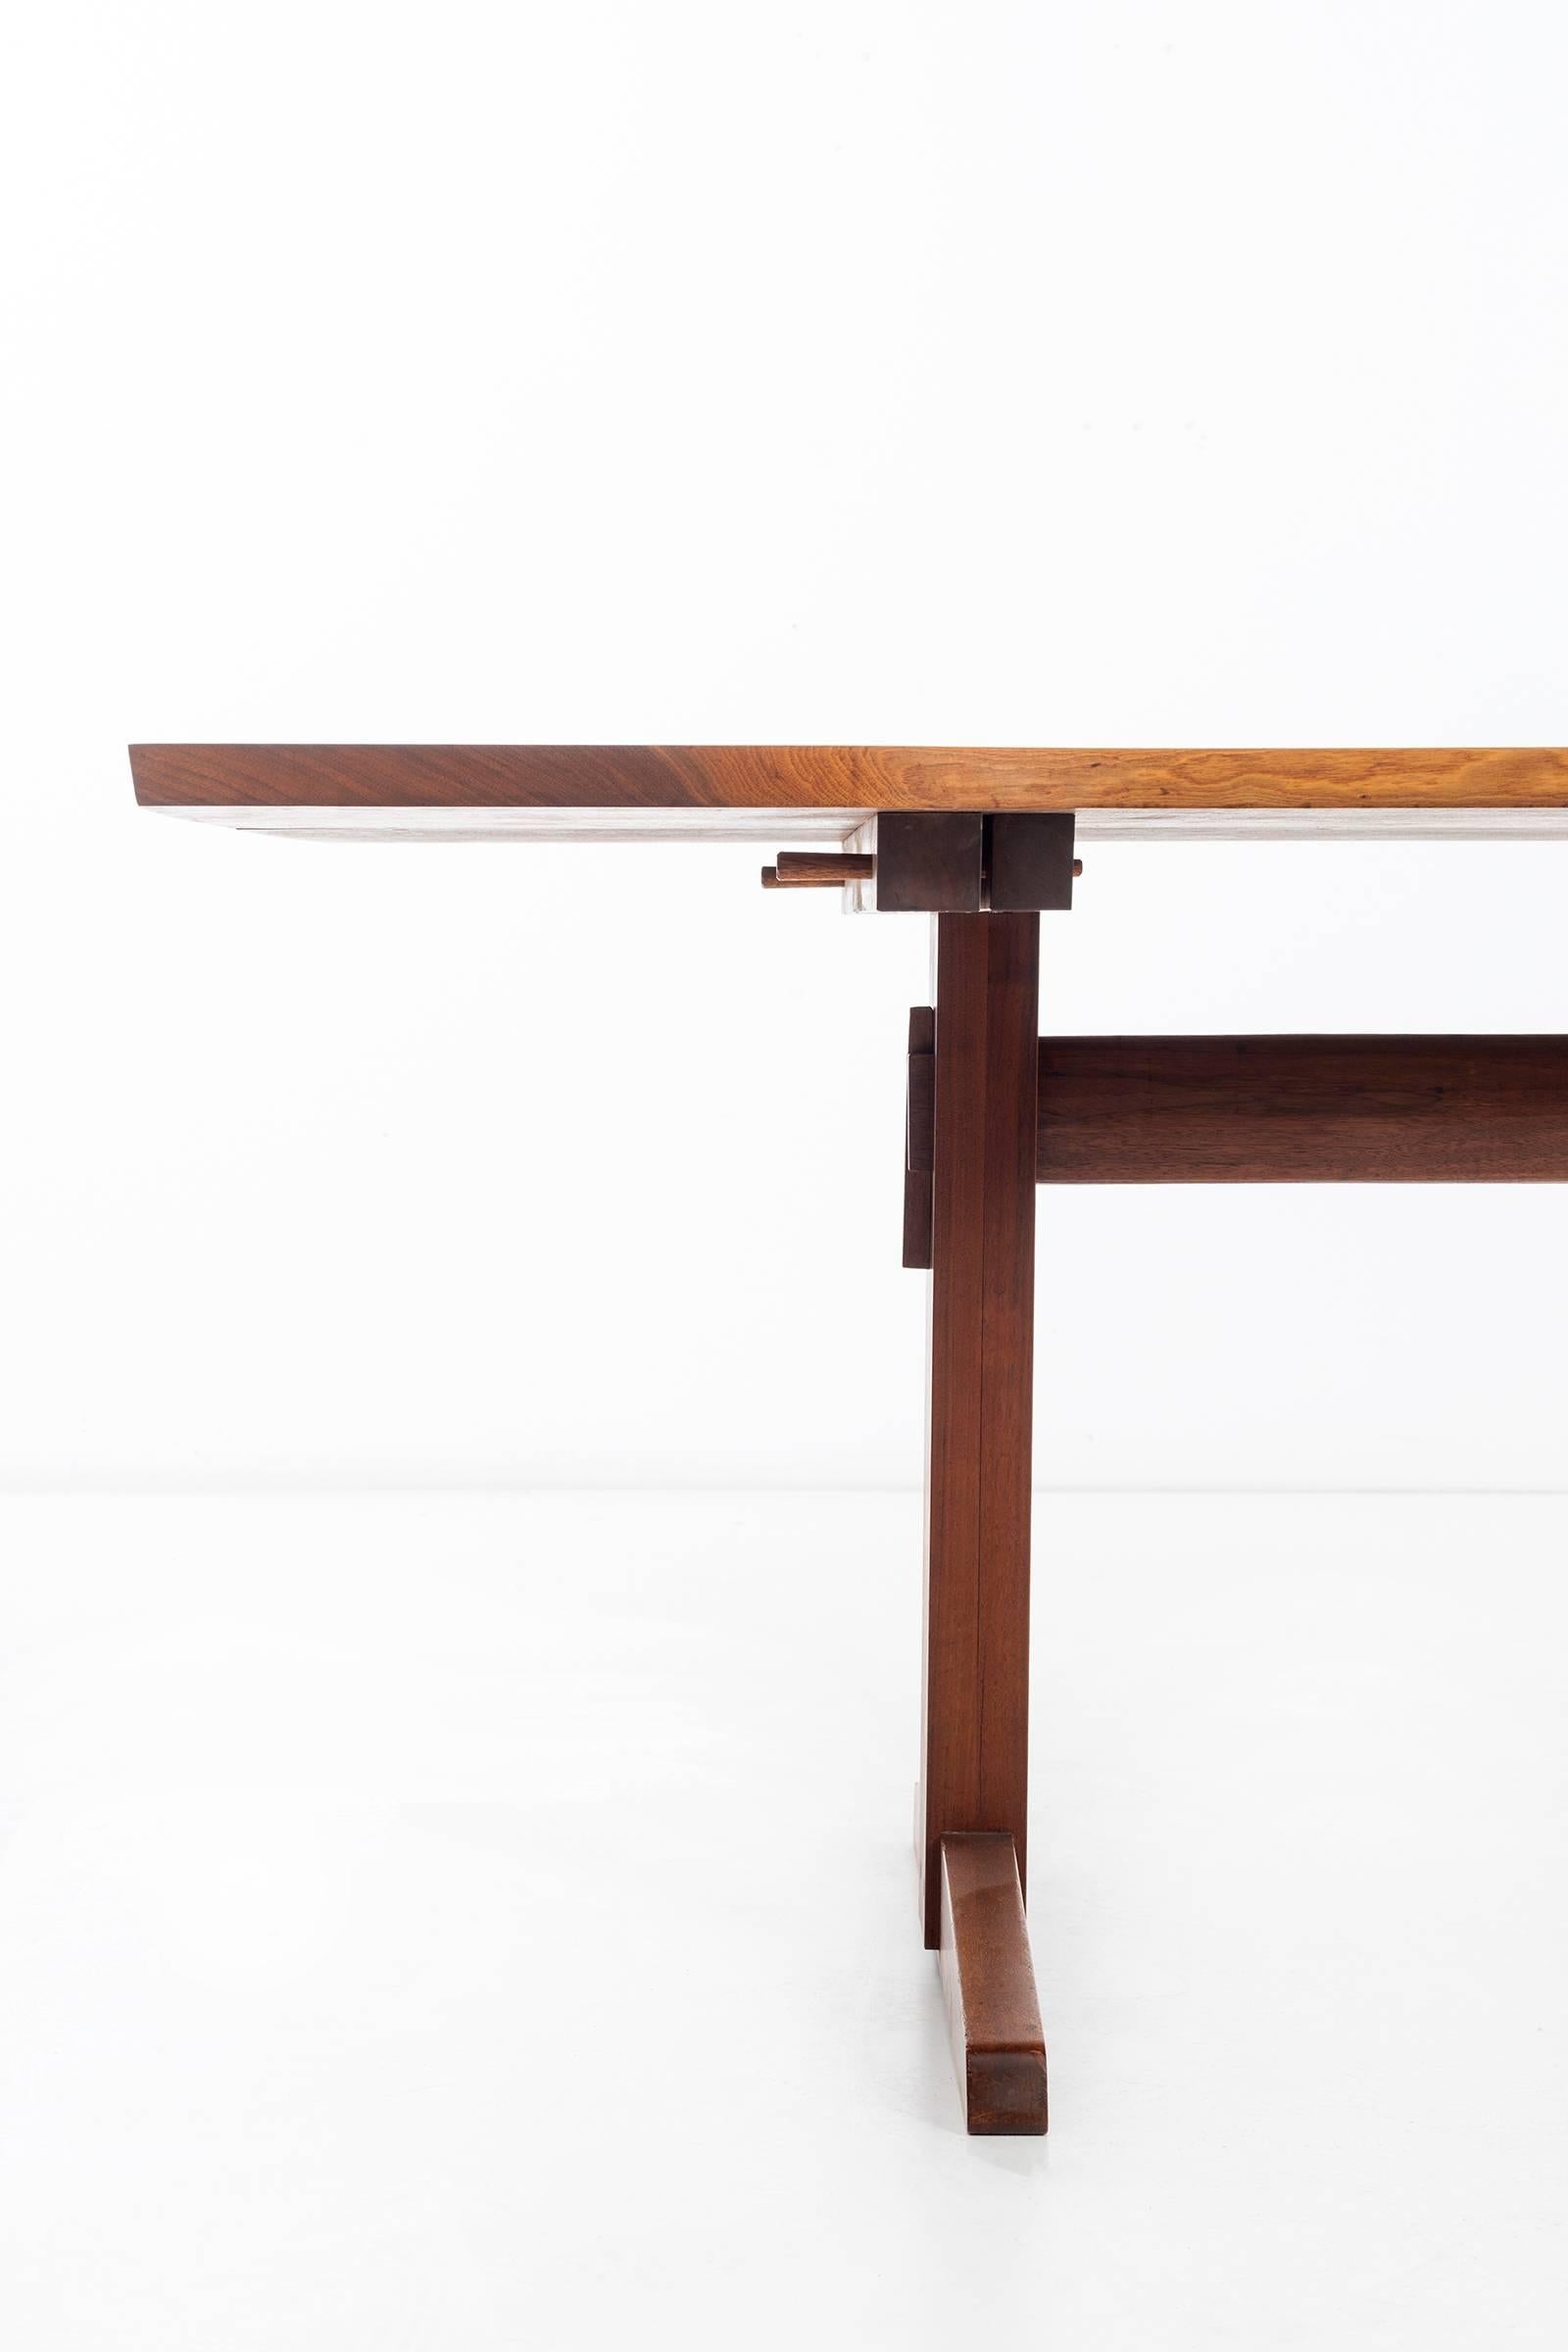 George Nakashima (1905 - 1990)
Custom free-edge American Studio trestle dining table in black walnut with sap grain details. 
The two planks joined and reinforced with rosewood butterflies, fitted precisely to base, 
and secured by walnut pegs.
New